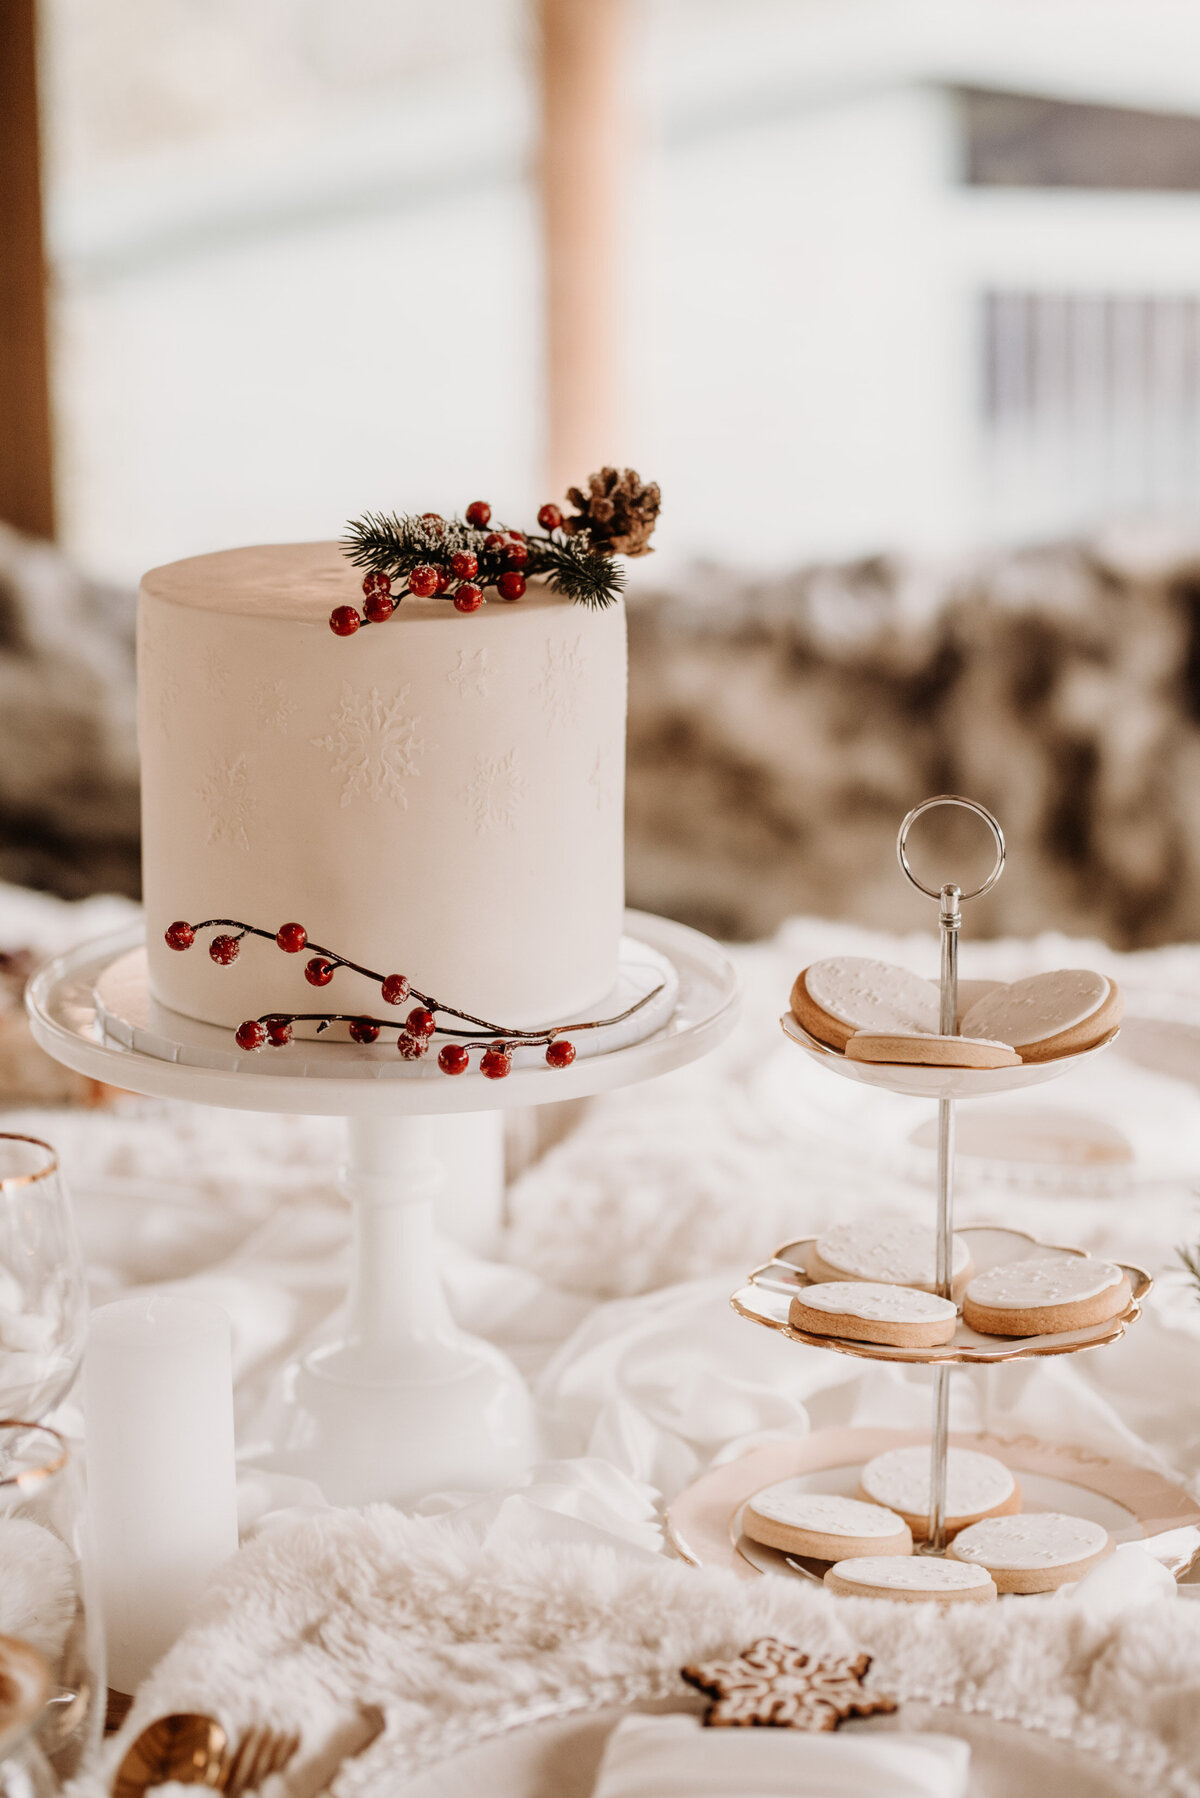 Christmas wedding cake with snowflakes and berries and biscuits for dessert table